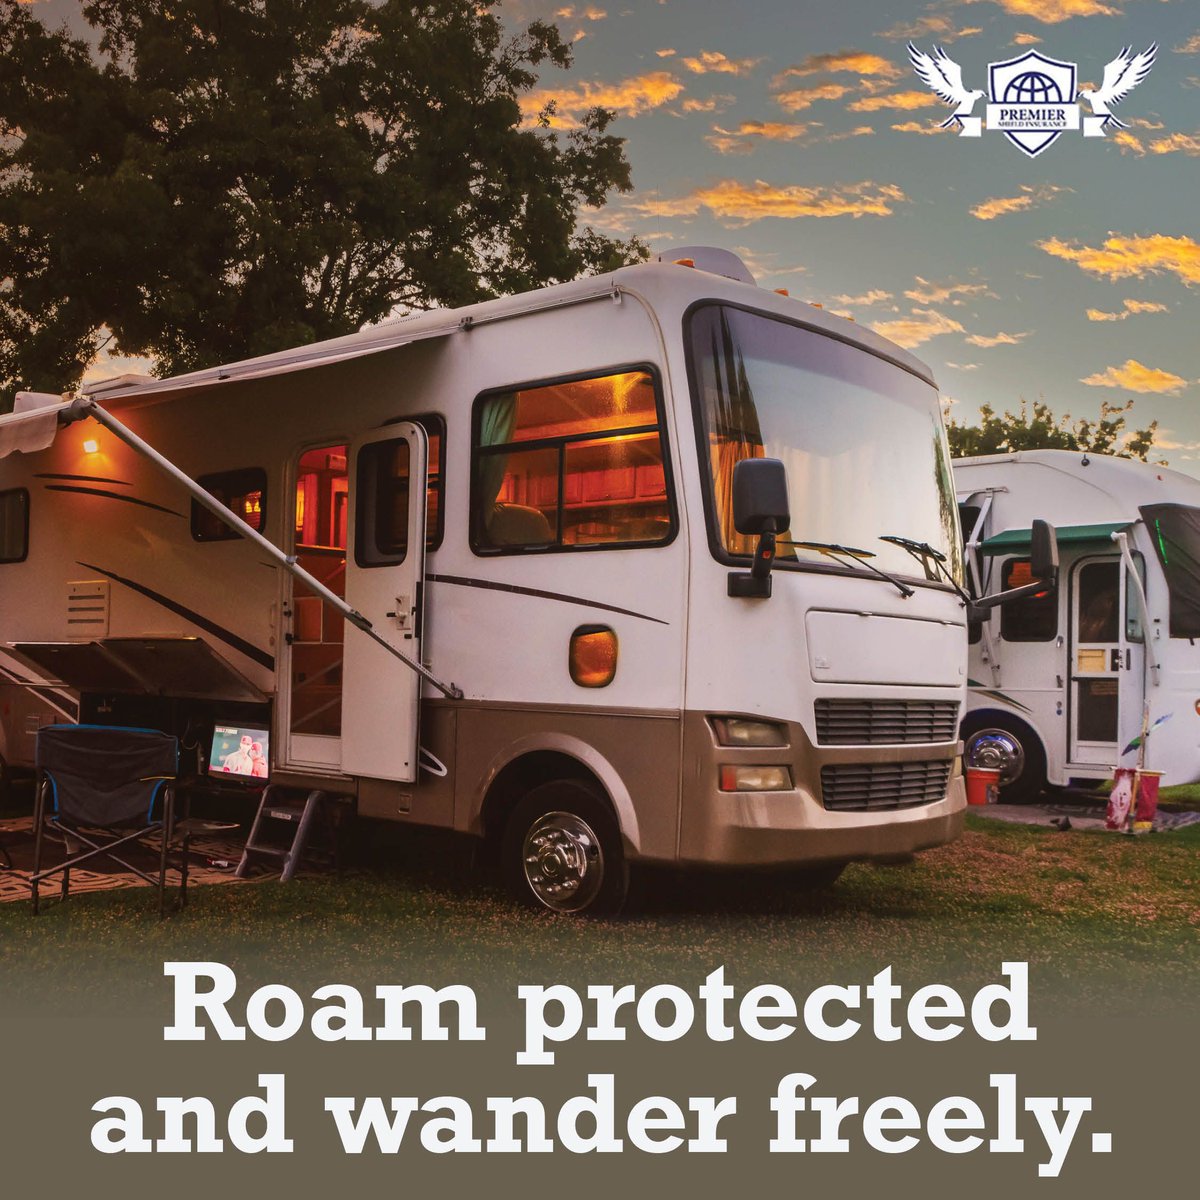 Prepare your chariot for wondrous adventures! Premier Shield's RV insurance shall shield you as you wander through realms unknown.

Unveil the true power of protection and request a quote today at premiershieldinsurance.net/personal-insur…

#RVinsurance #CamperInsurance #premiershield